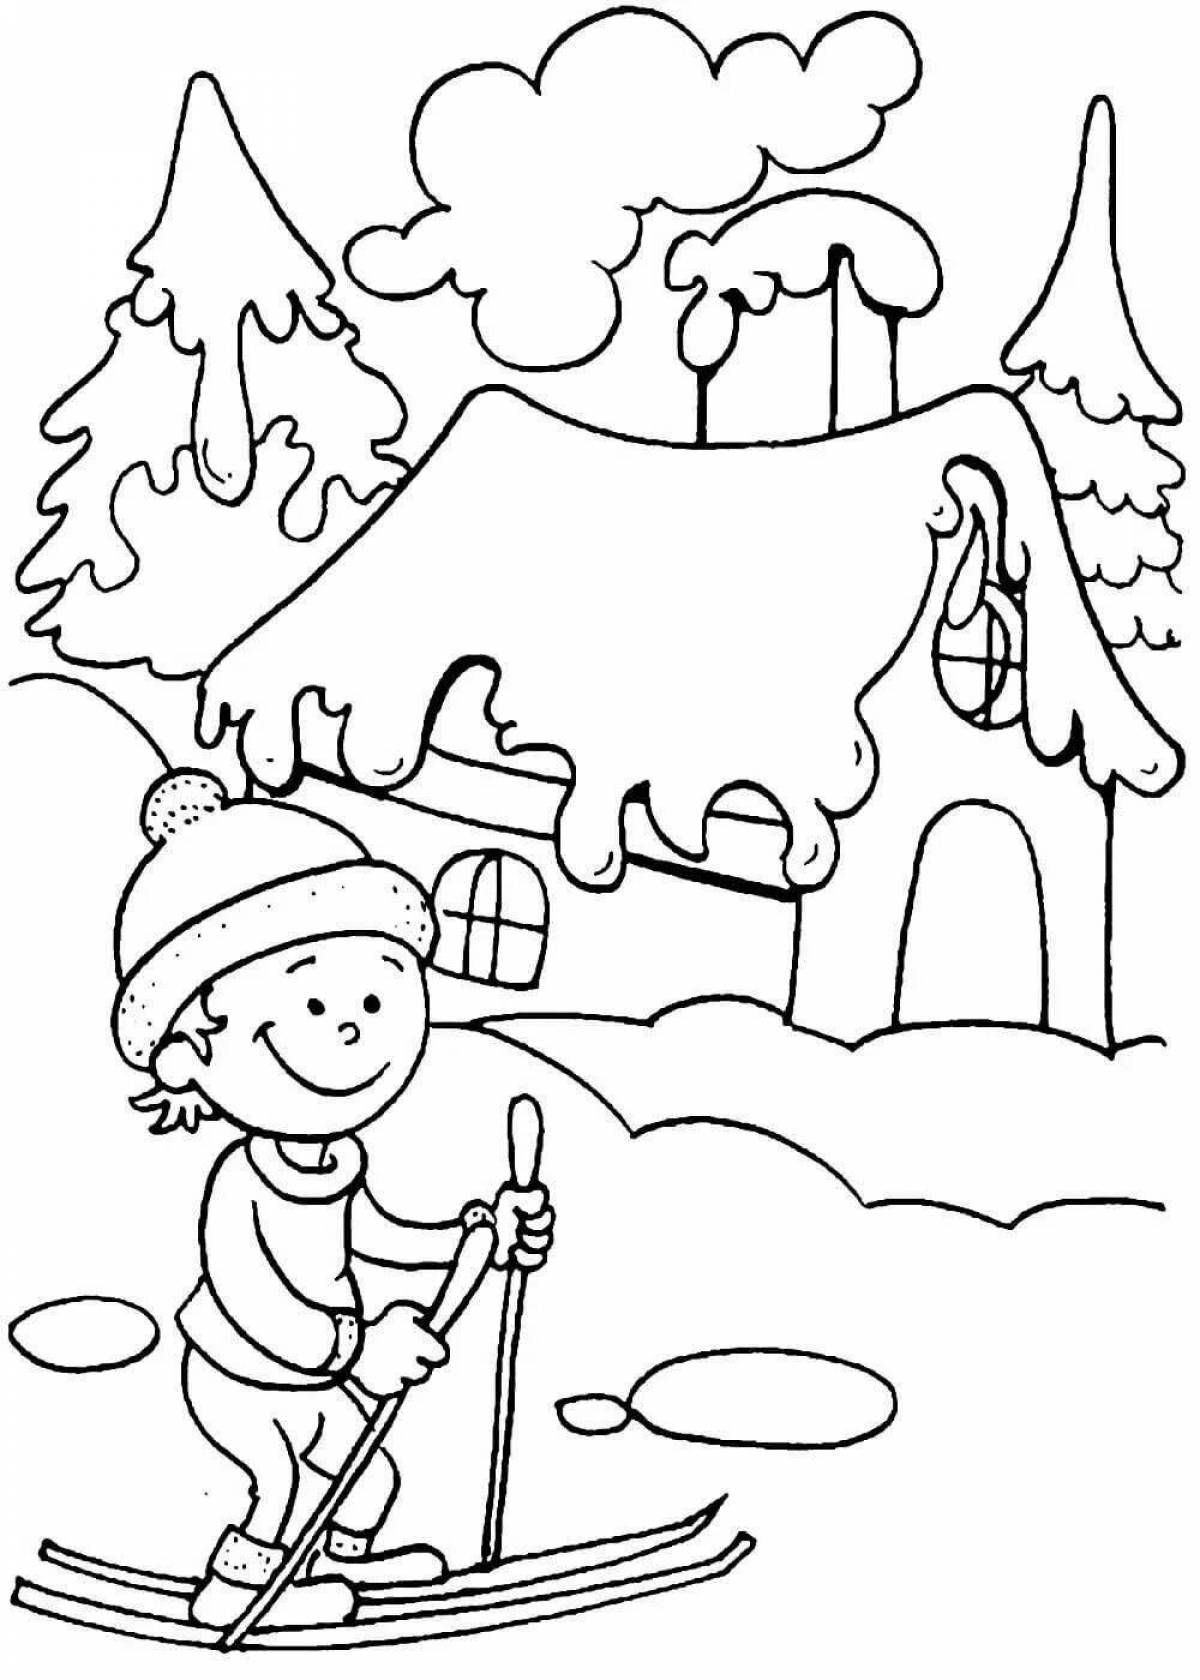 Fancy january coloring book for kids